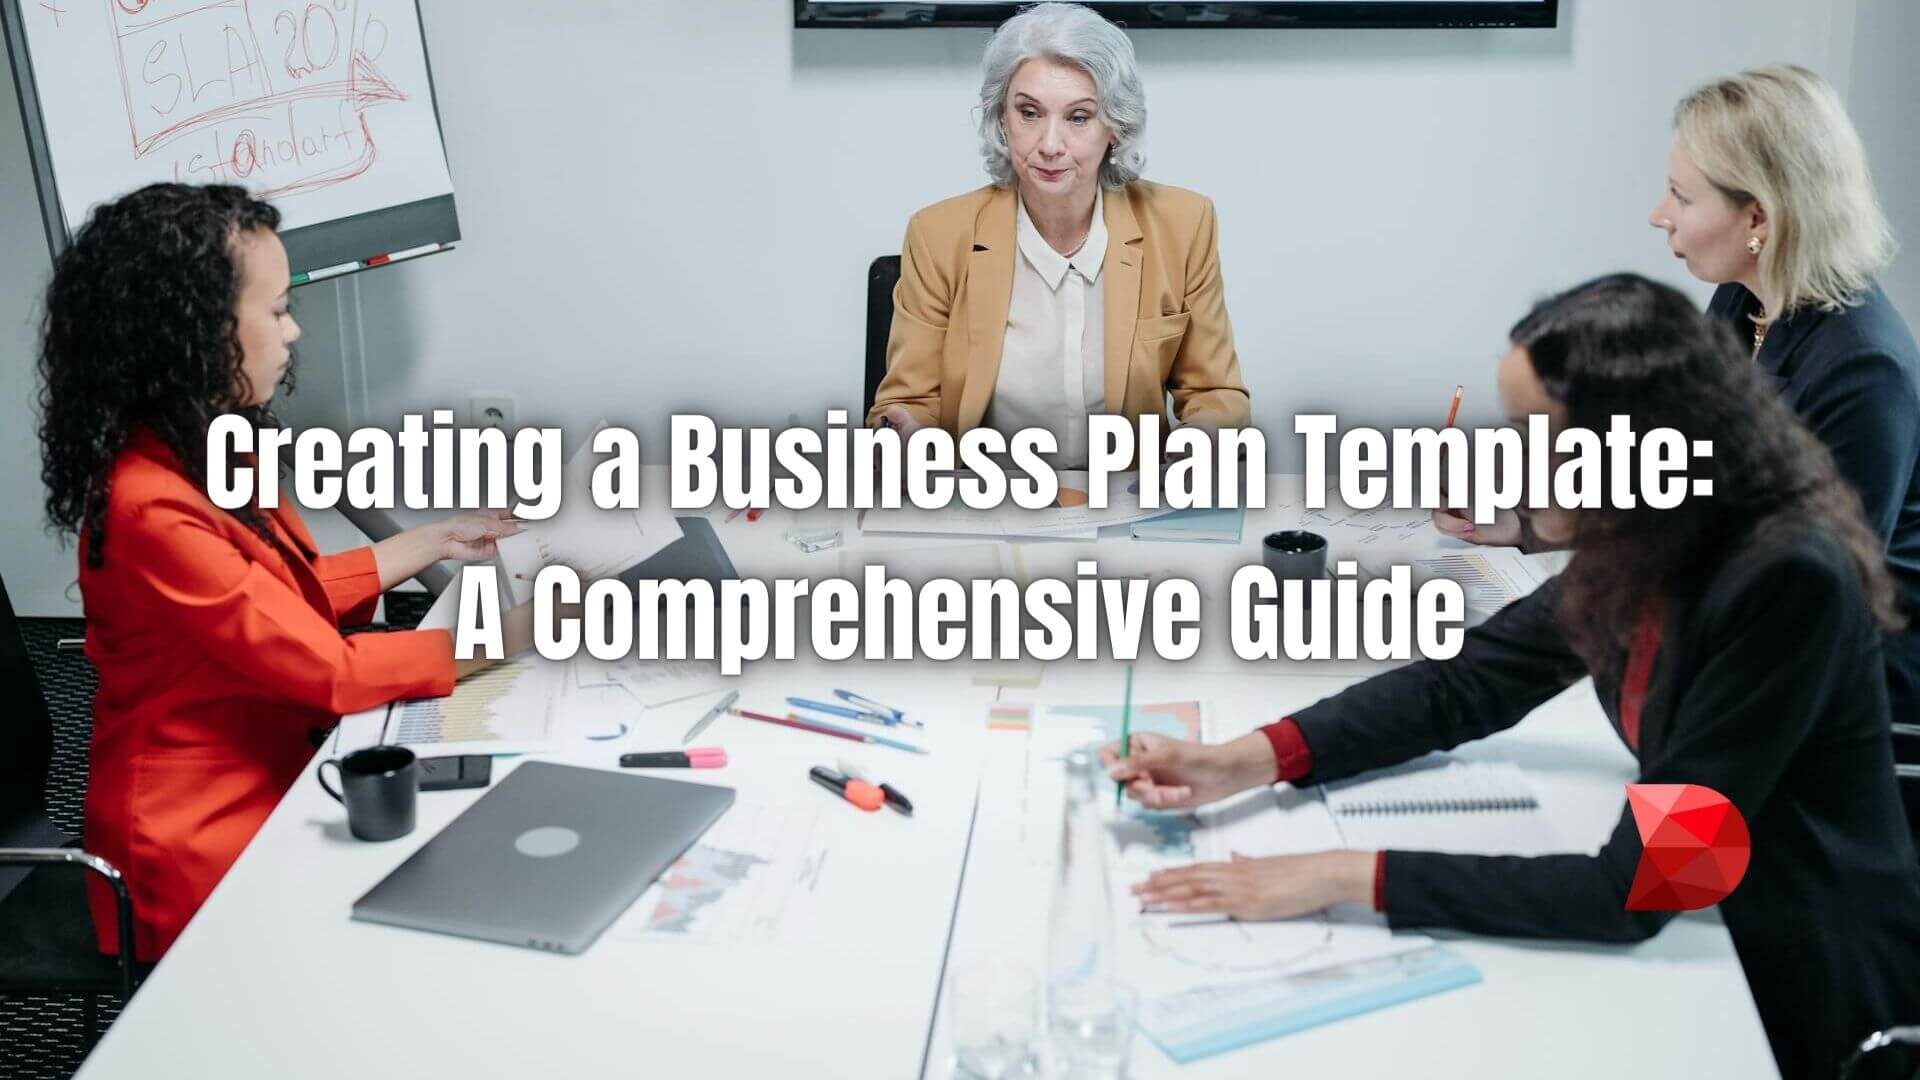 Create a roadmap for your business's future with our expert guide. Learn how to structure and execute a winning business plan template.